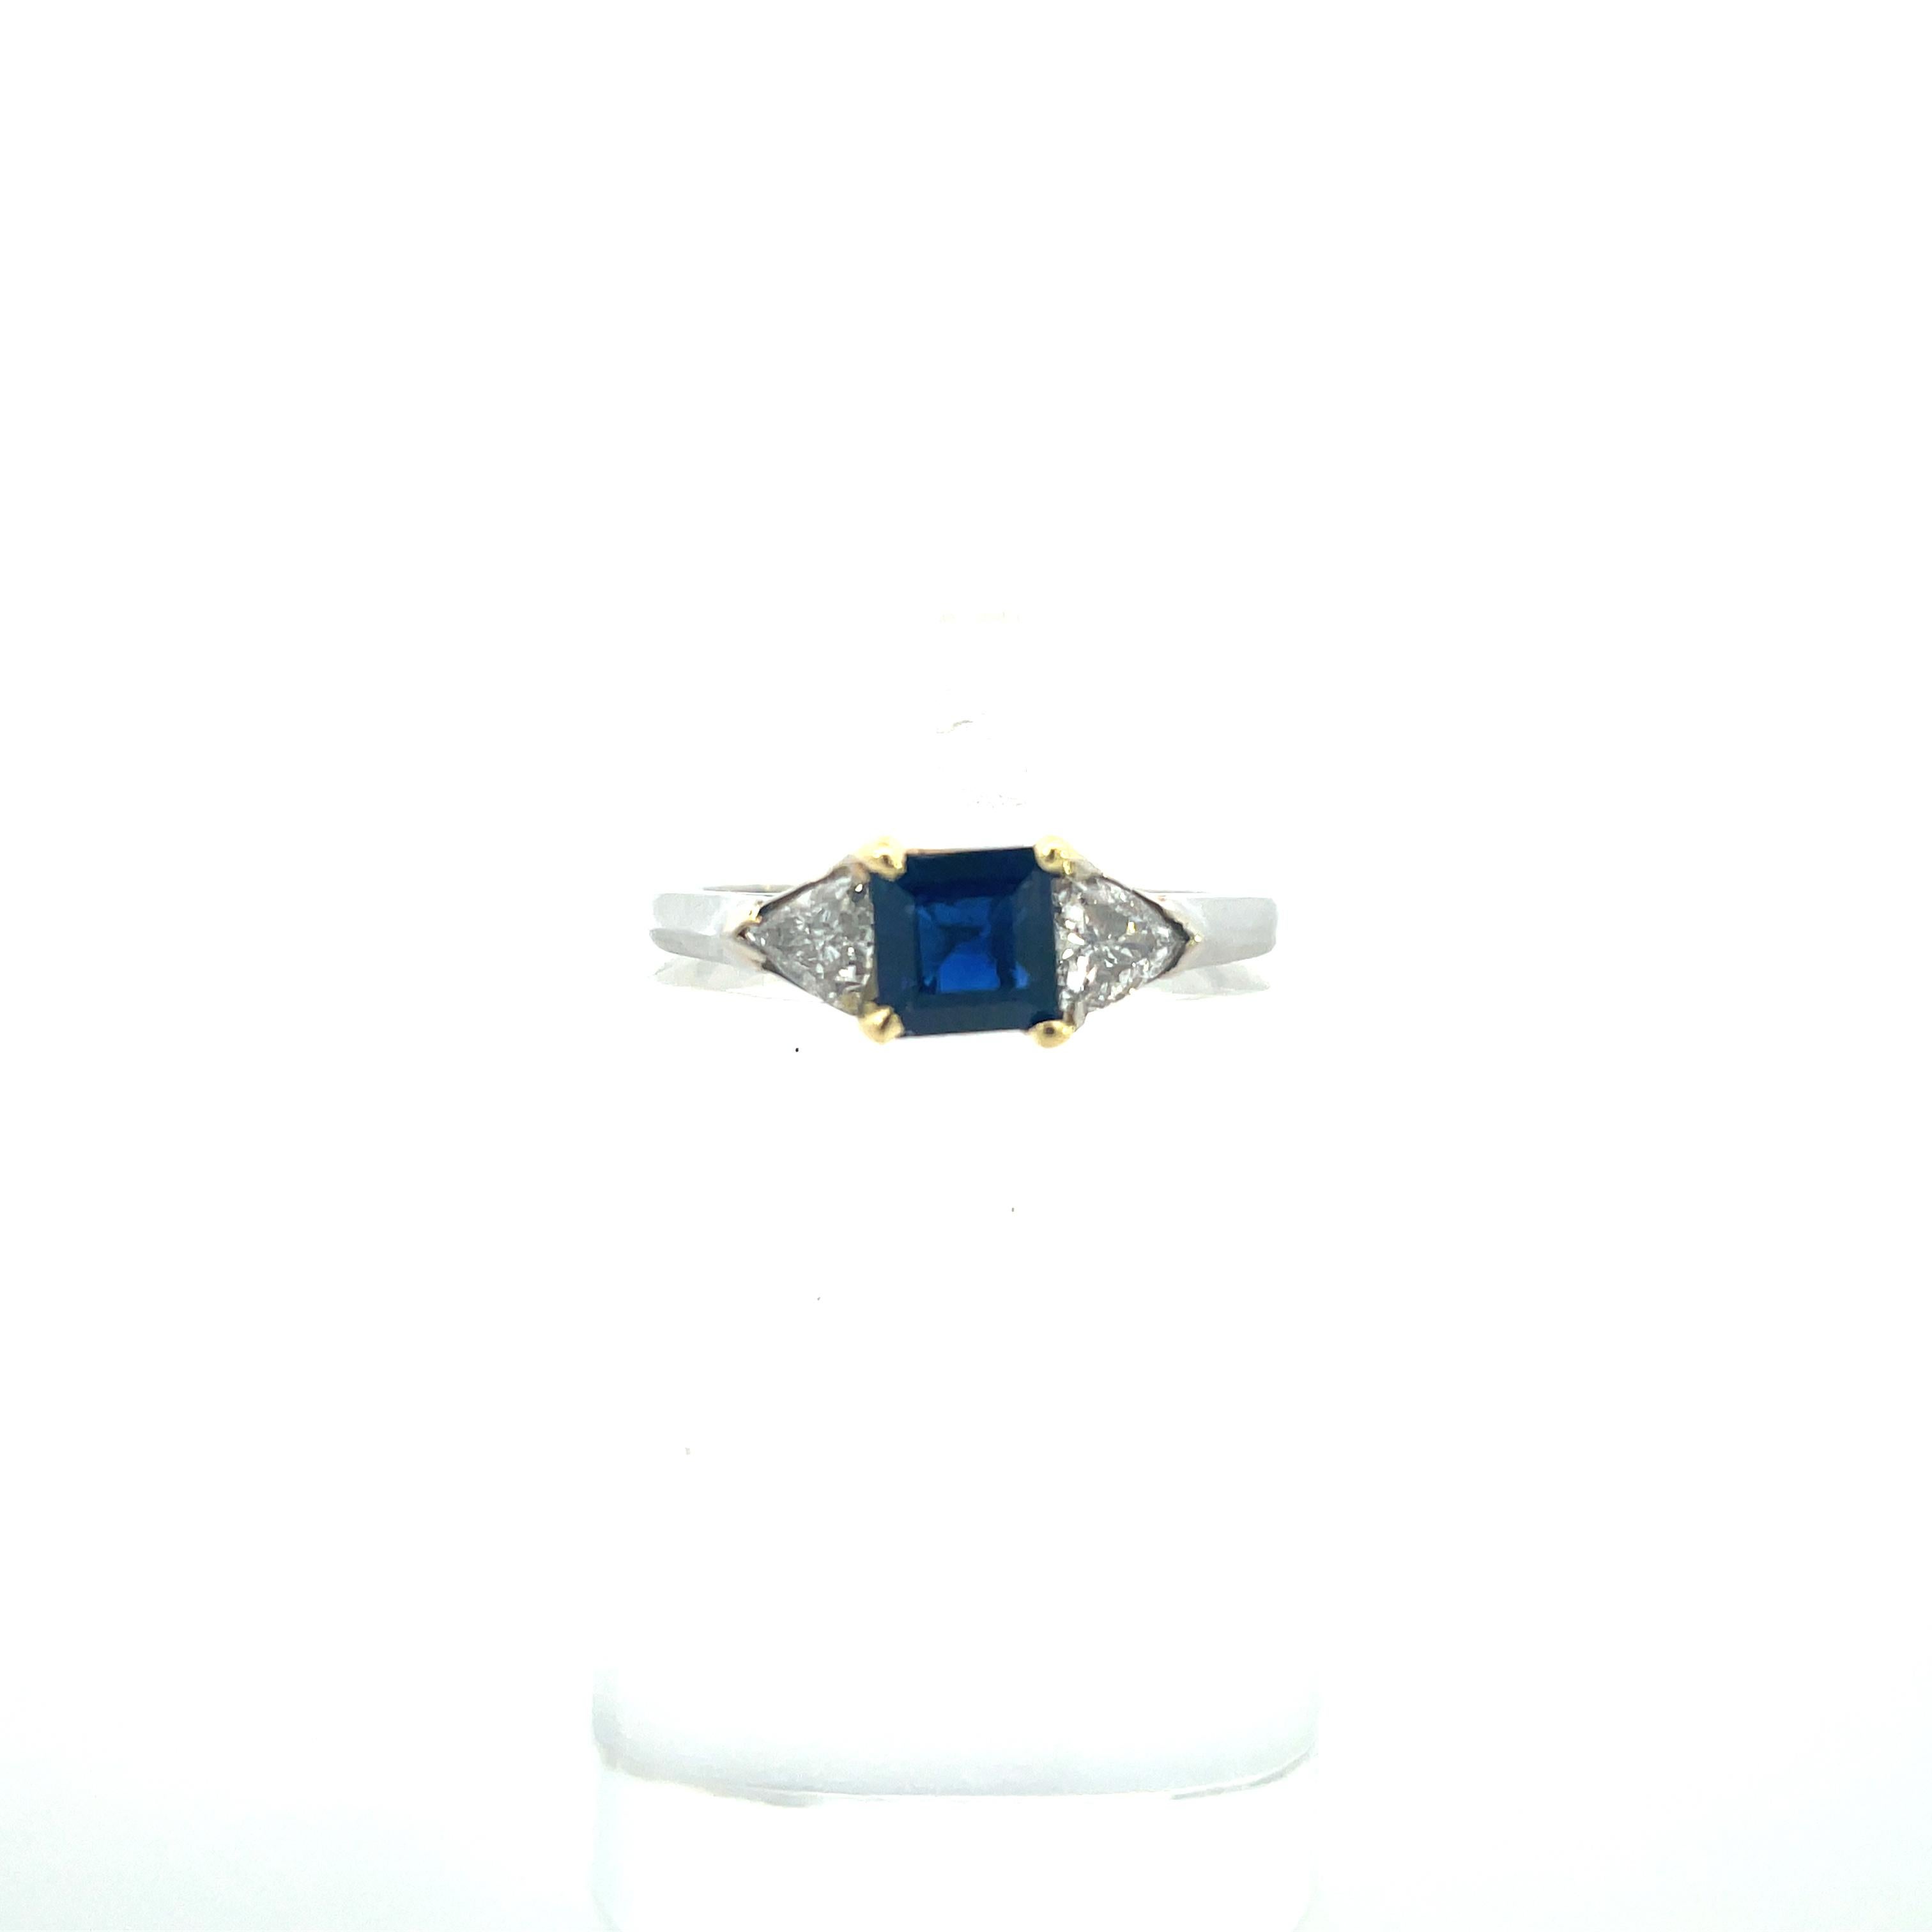 This gorgeous piece is a contemporary, platinum and 18k yellow gold ring with blue sapphire and trillion-cut diamonds. This ring features a unique combination of components, with the blue sapphire being square-cut and the diamonds being